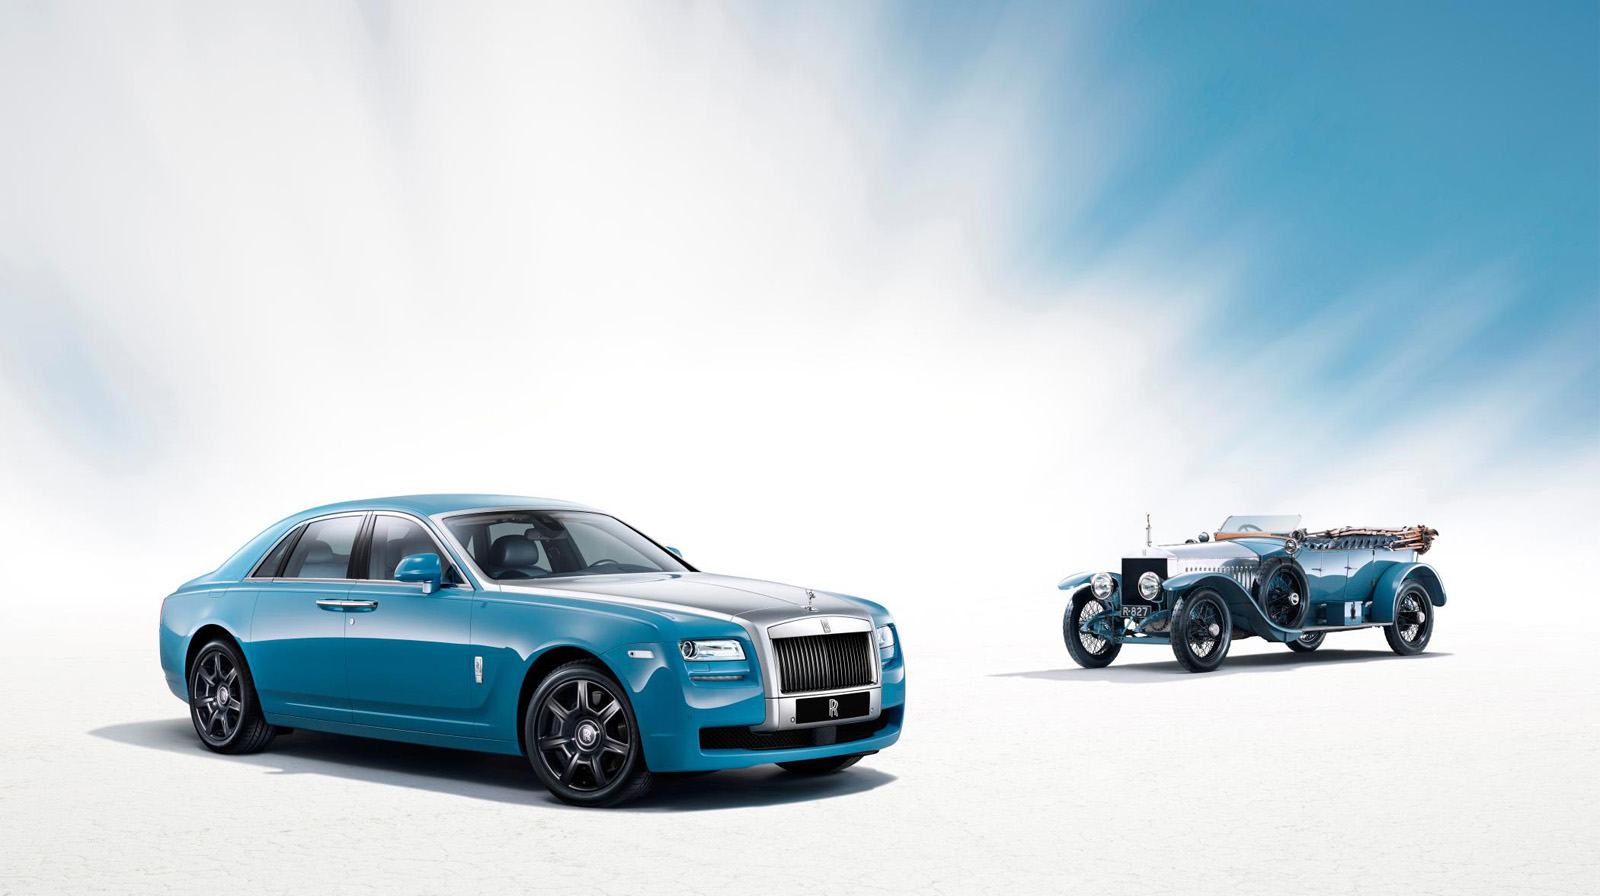 Stoer ding: Rolls-Royce Ghost Alpine Trial Centenary Collection